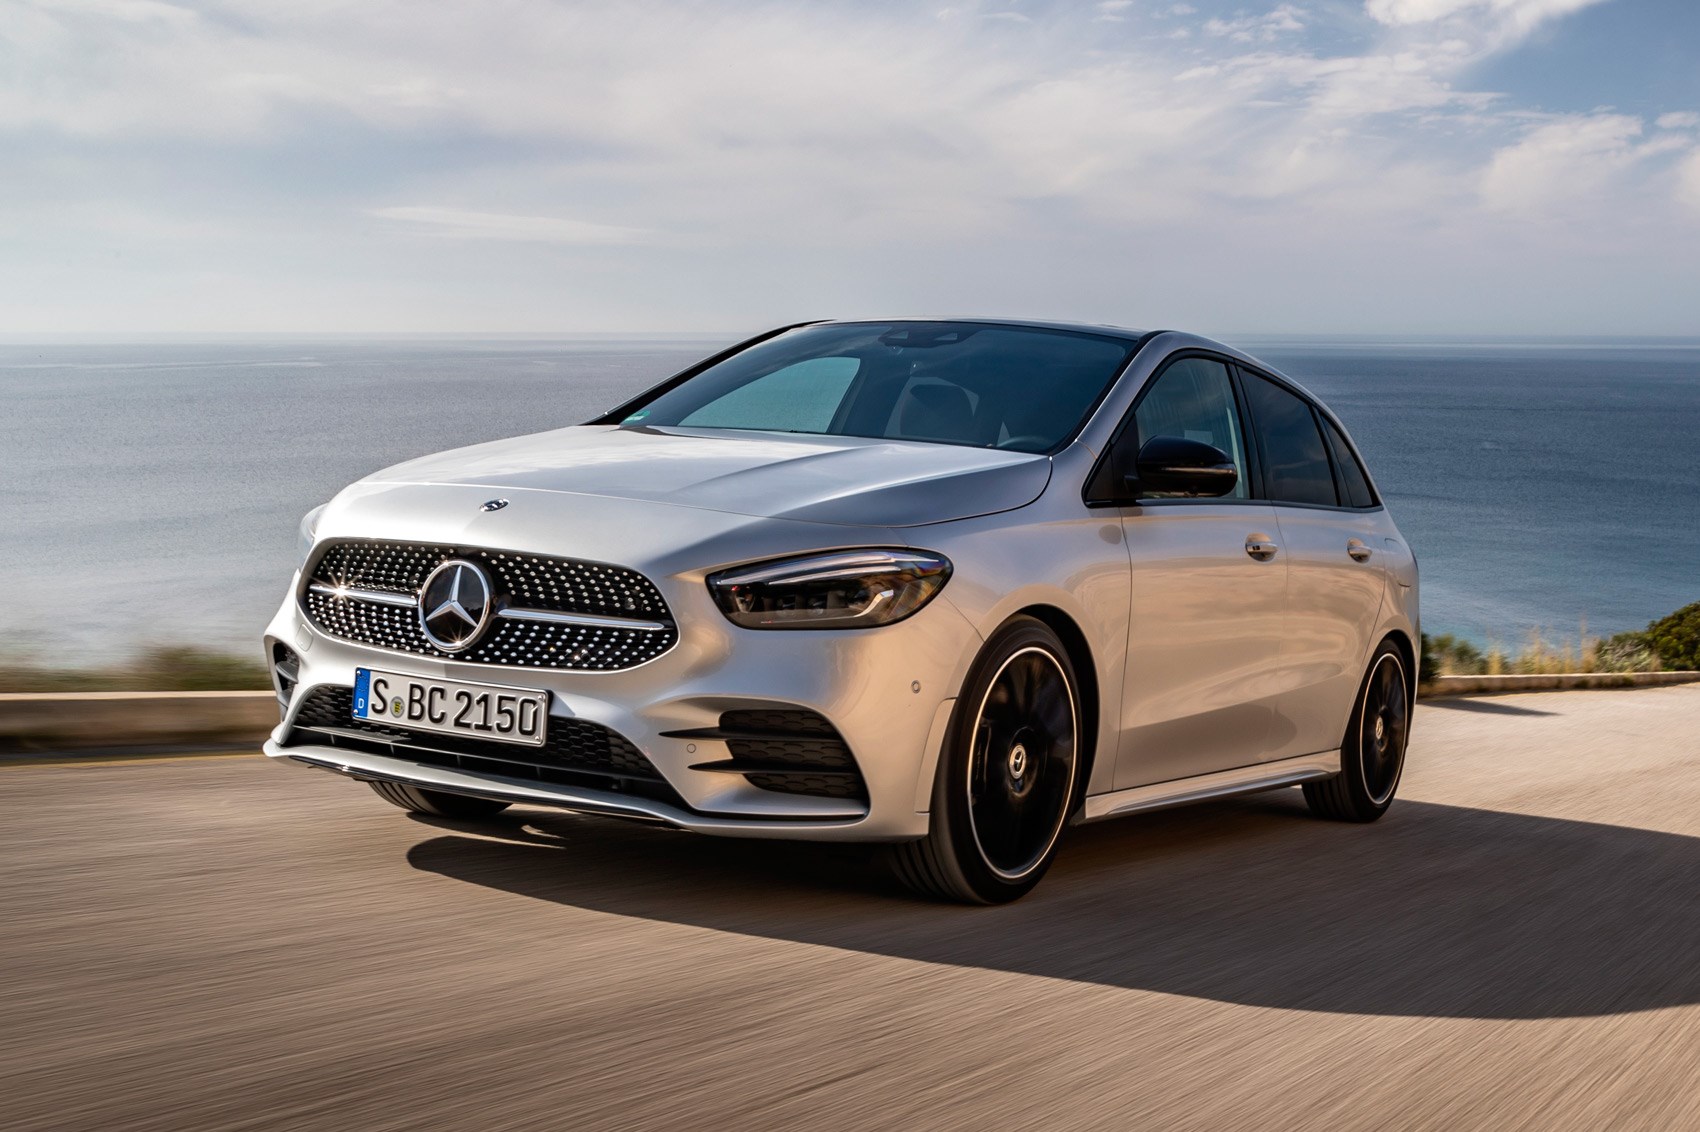 Mercedes B-class (2018) review: family ties